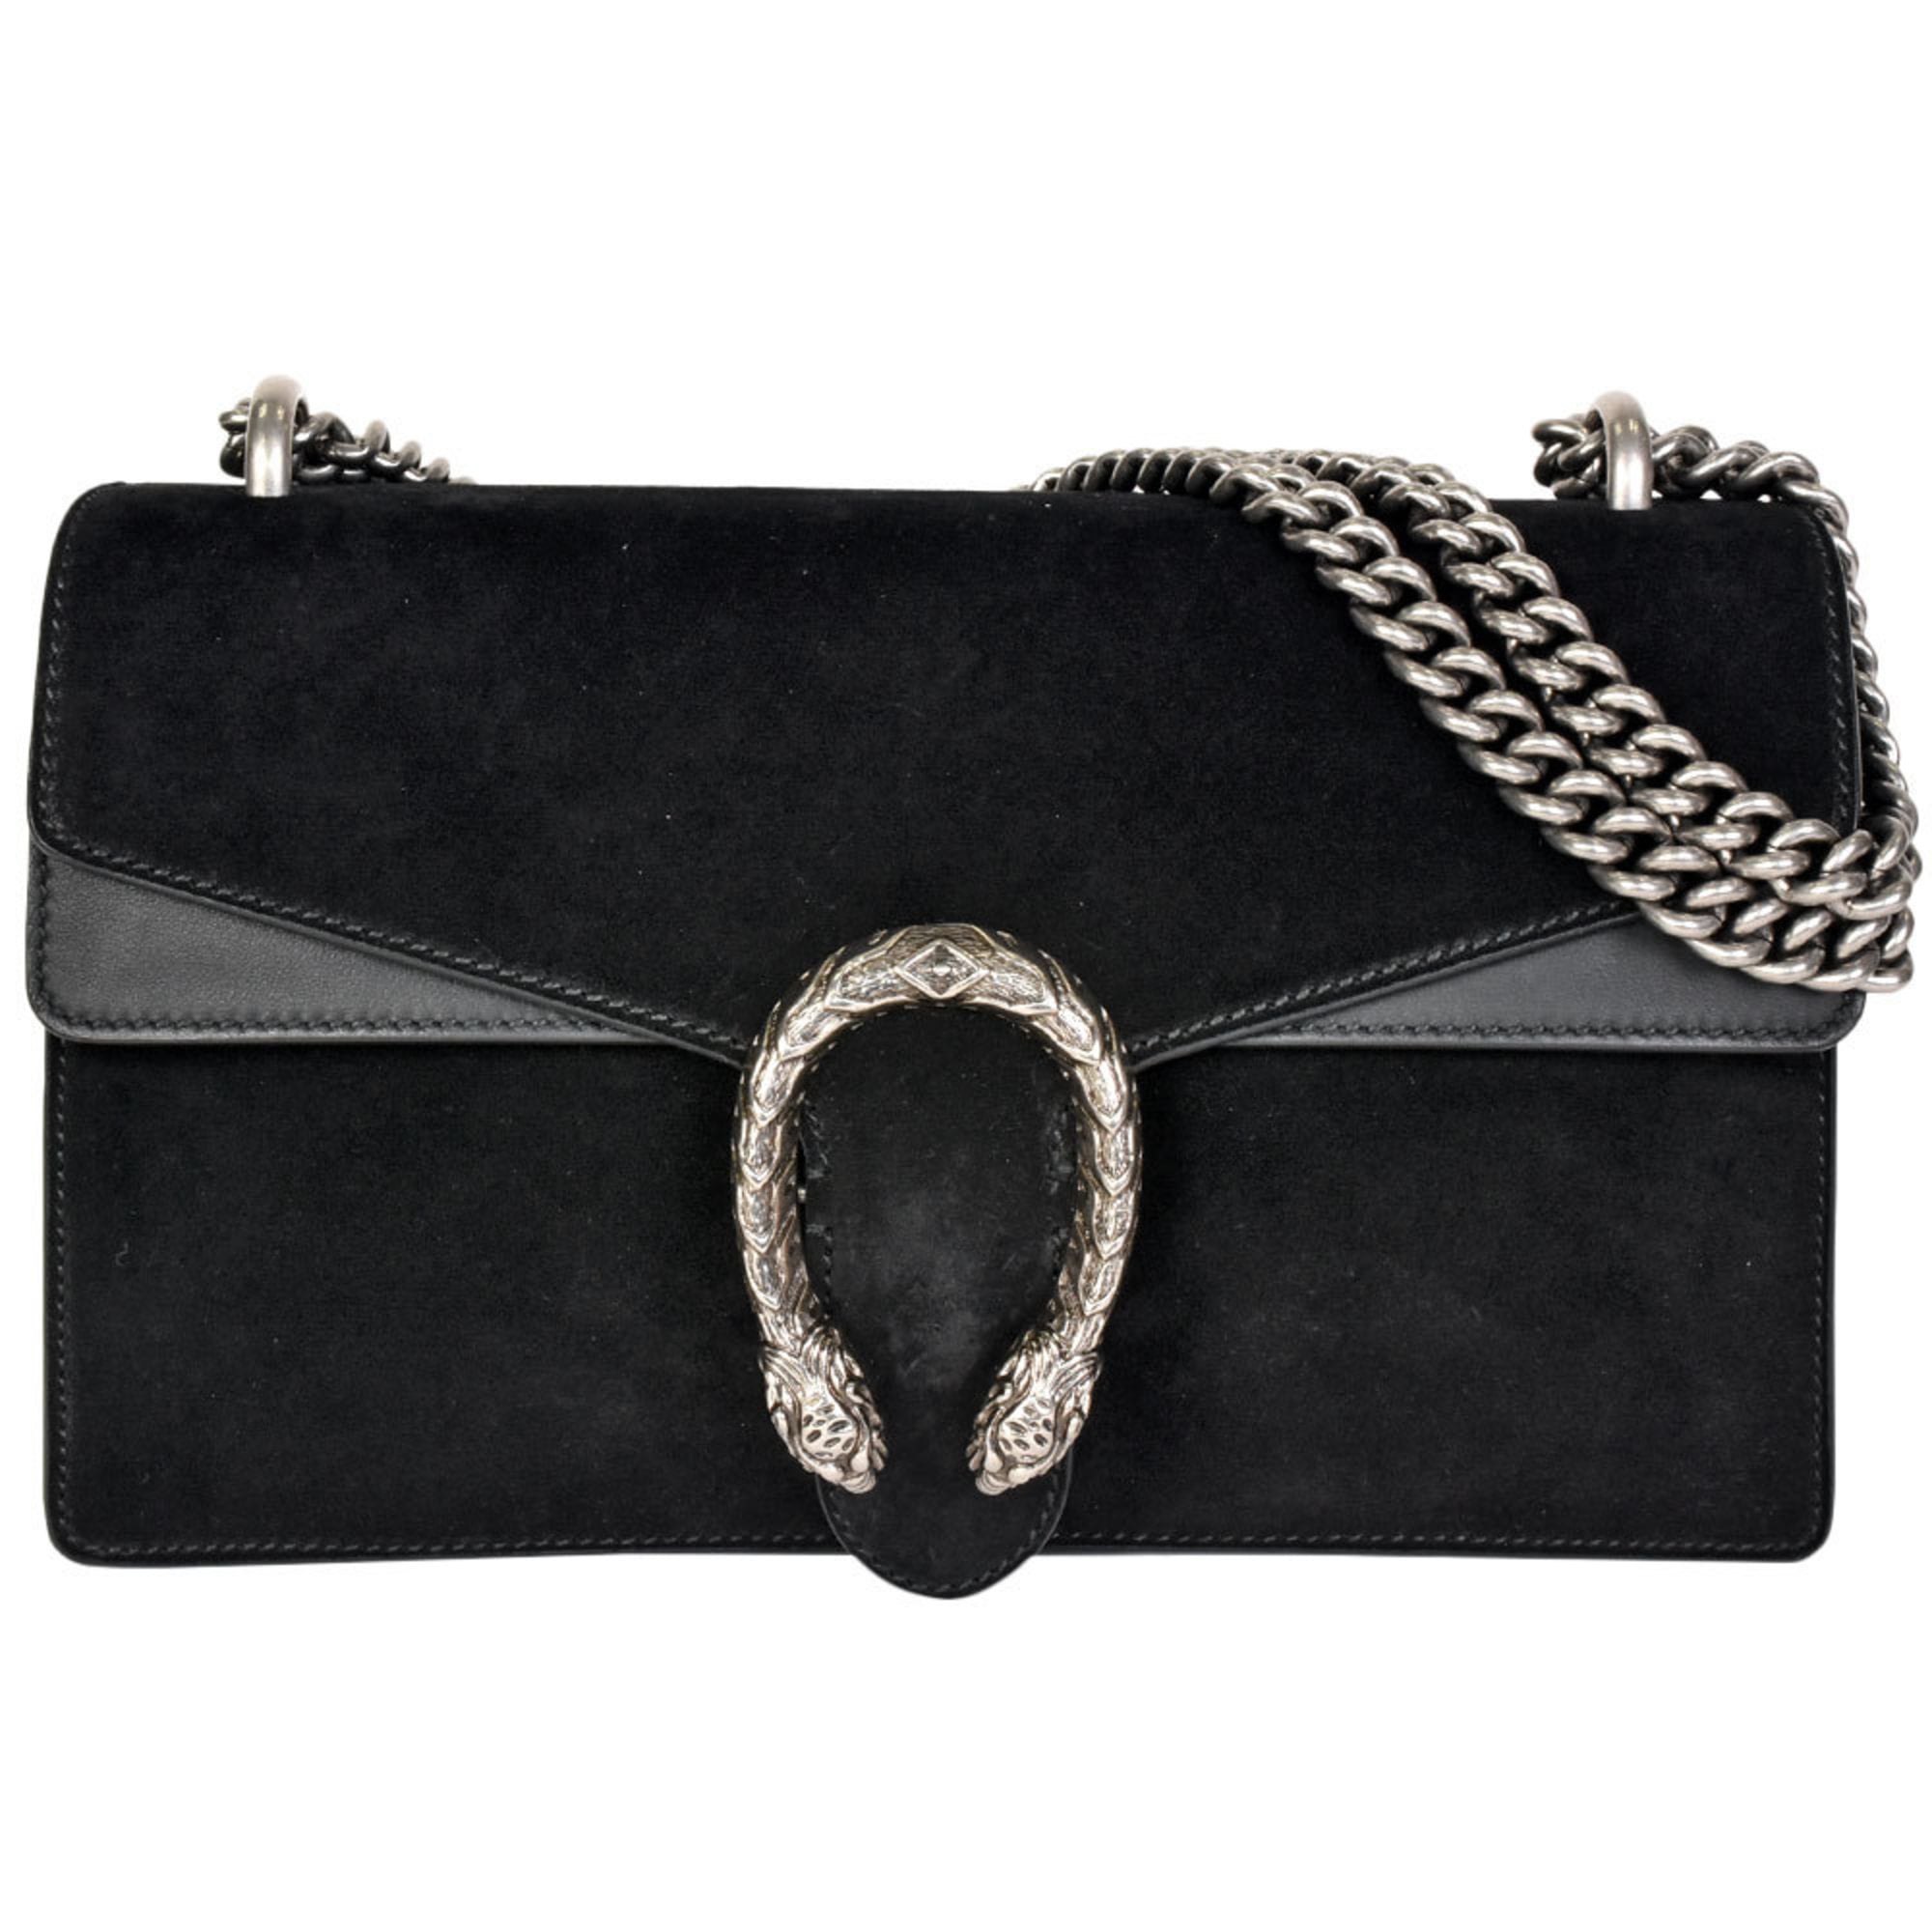 Authenticated Used Gucci shoulder bag suede leather black silver metal fittings 400249 - Walmart.com